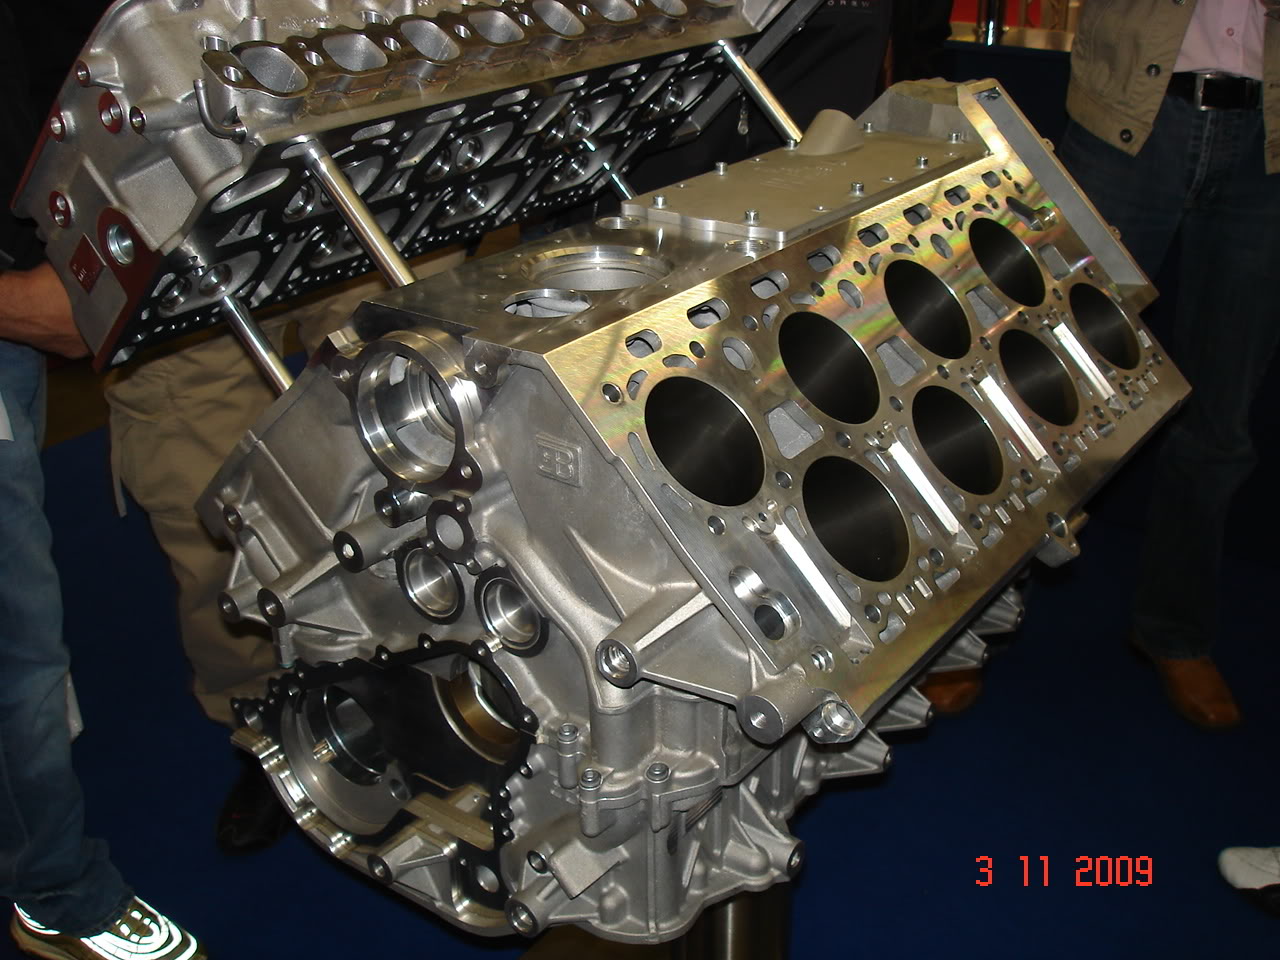 The top of the W-16 block from a Bugatti Veyro